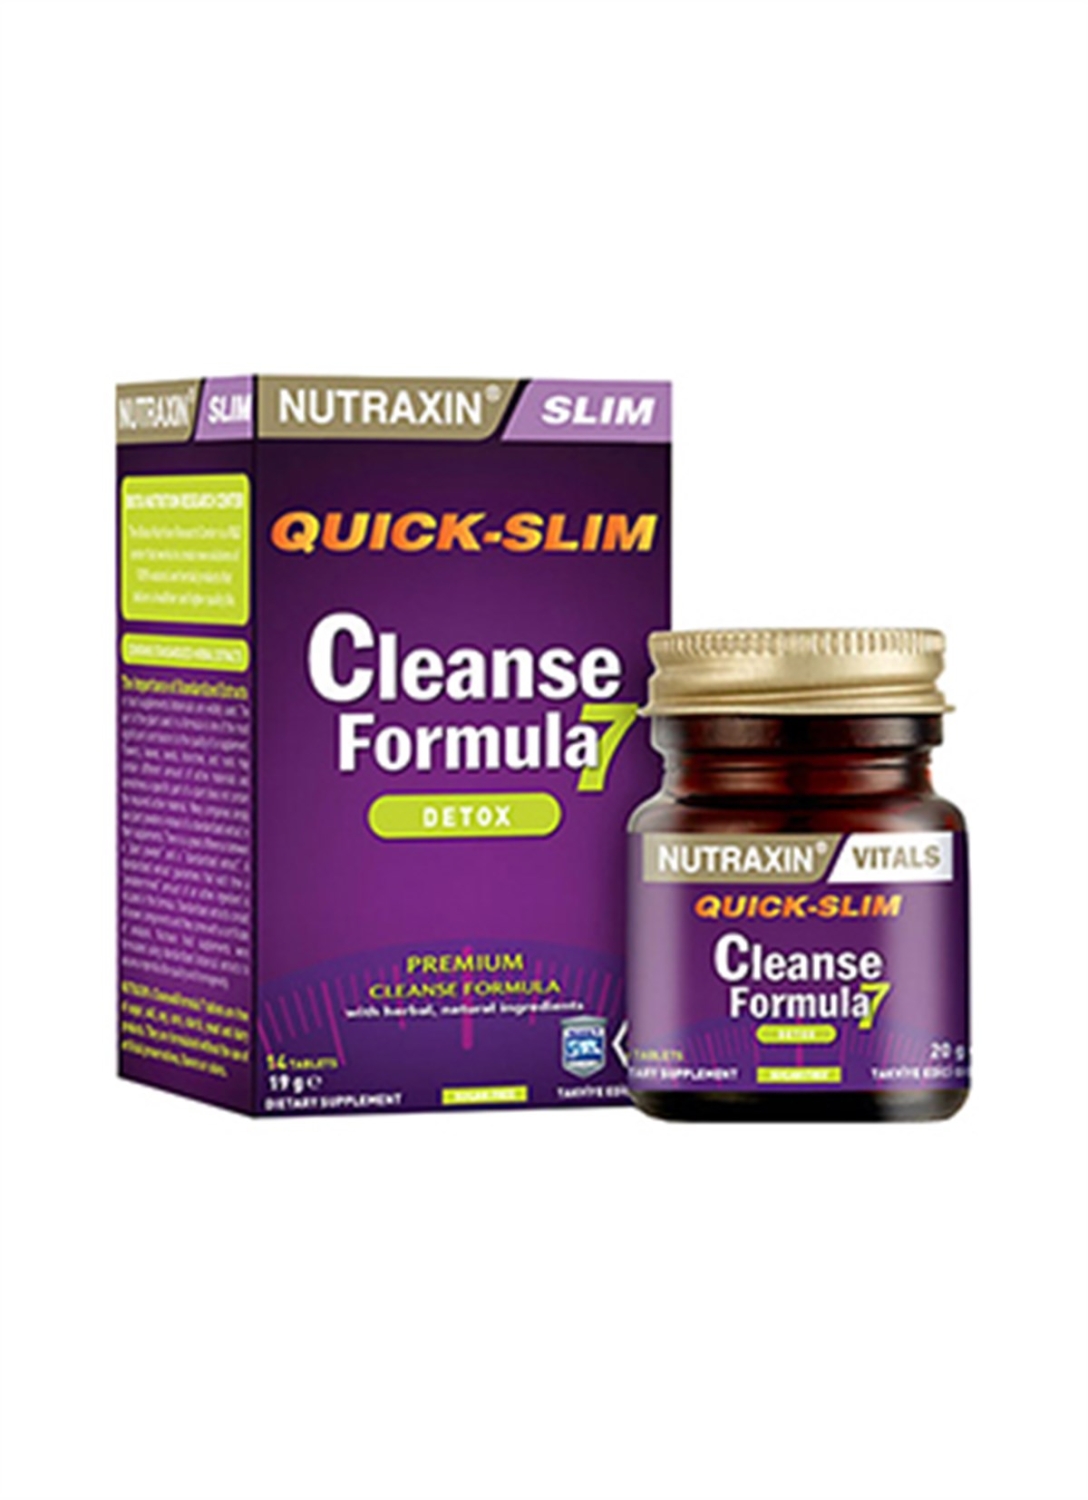 Nutraxin Quick-Slim Cleanse Formula 7 14 Tablet - 1